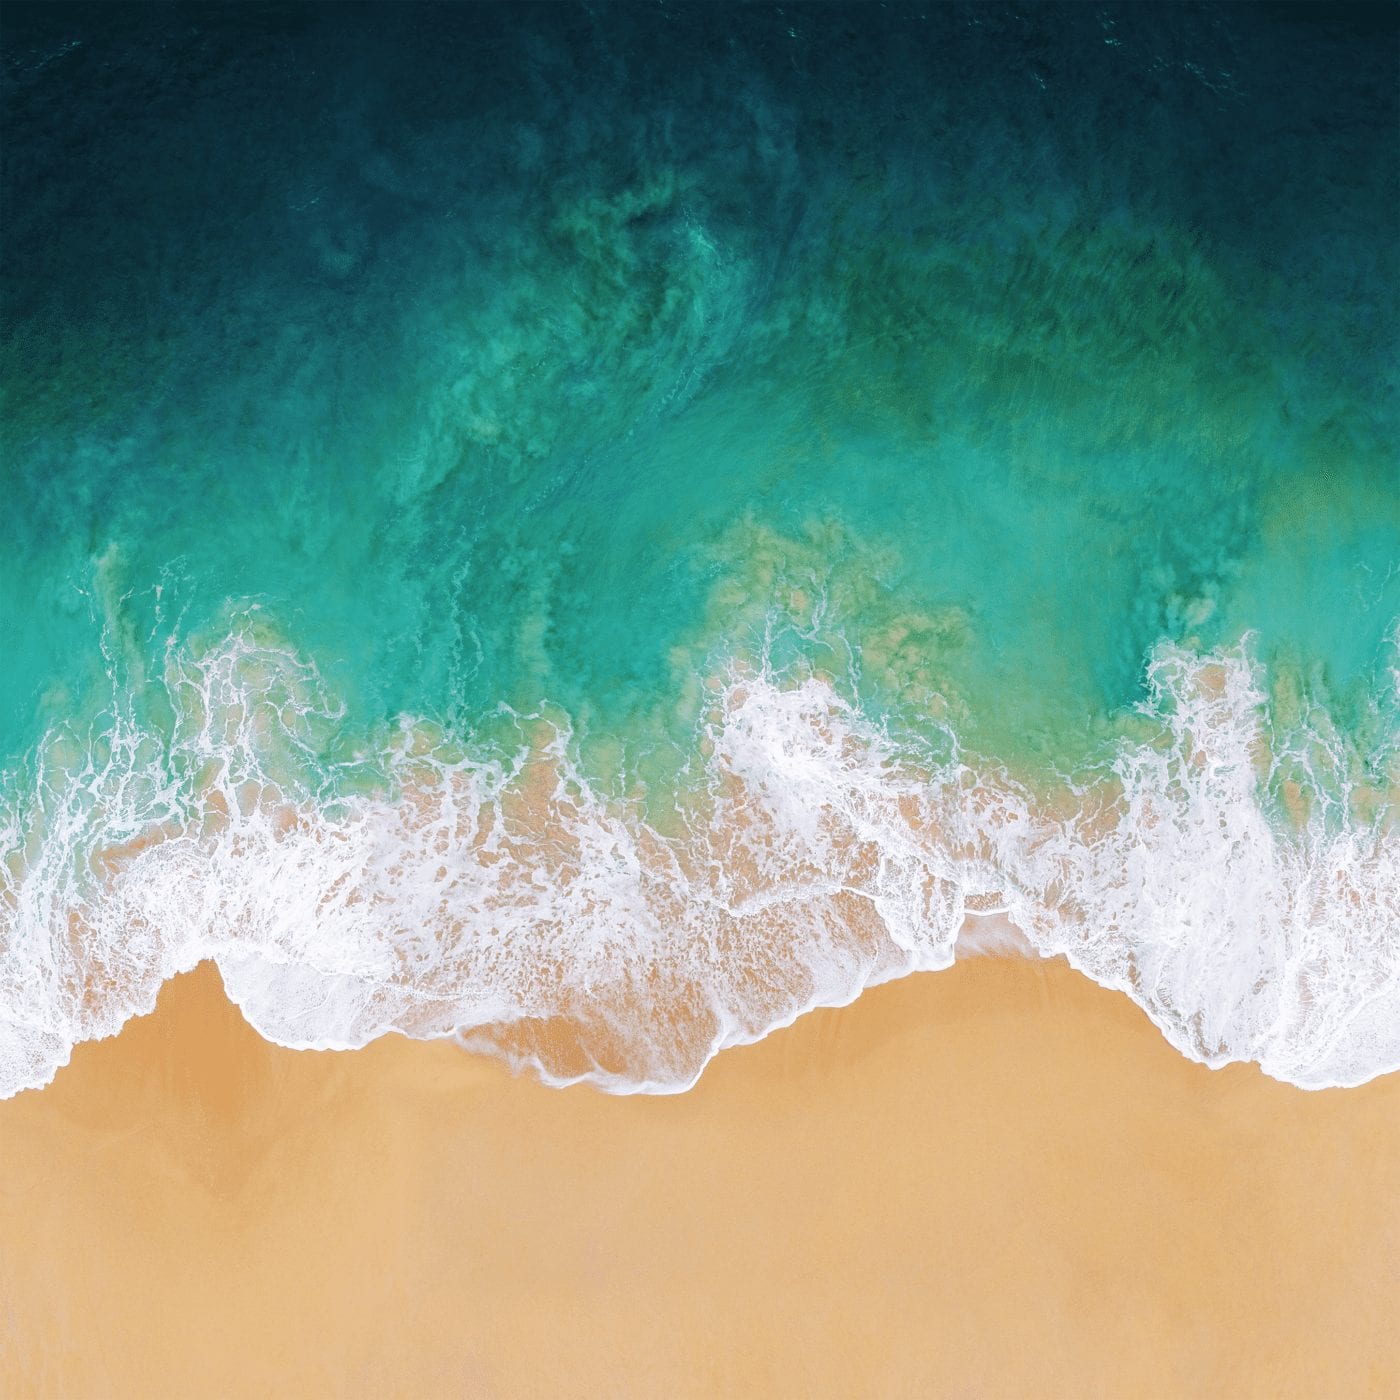 Mac Os Sierra For Iphone Wallpapers